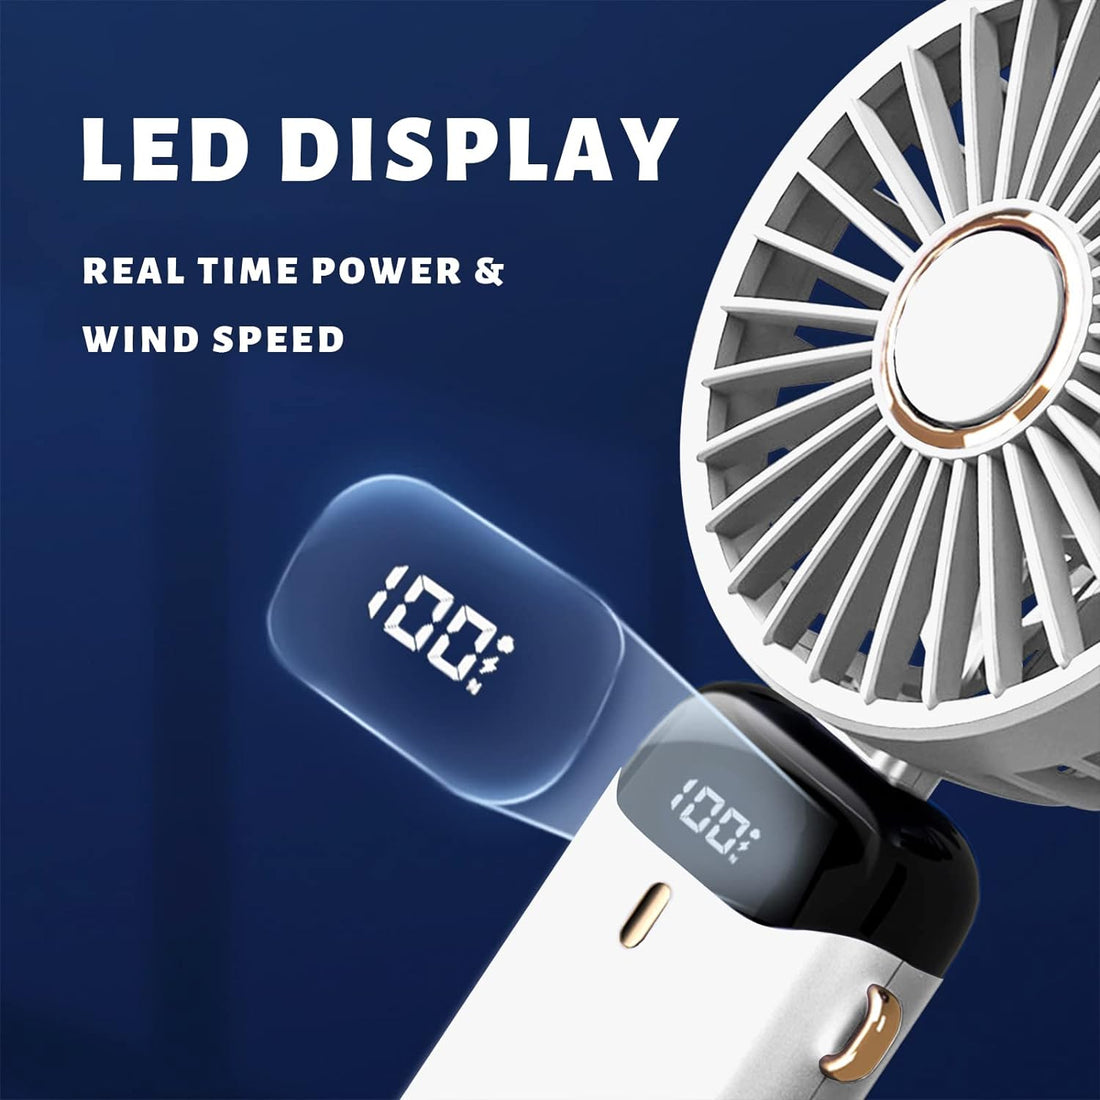 Portable Fan, Handheld Fan Personal Fan 5000mAh Rechargeable with 5 Speeds, Battery Operated Mini Fan with LED Display, 11-21Hs Desk Fan Working Time for Office Bedroom Outdoor Travel Camping-White